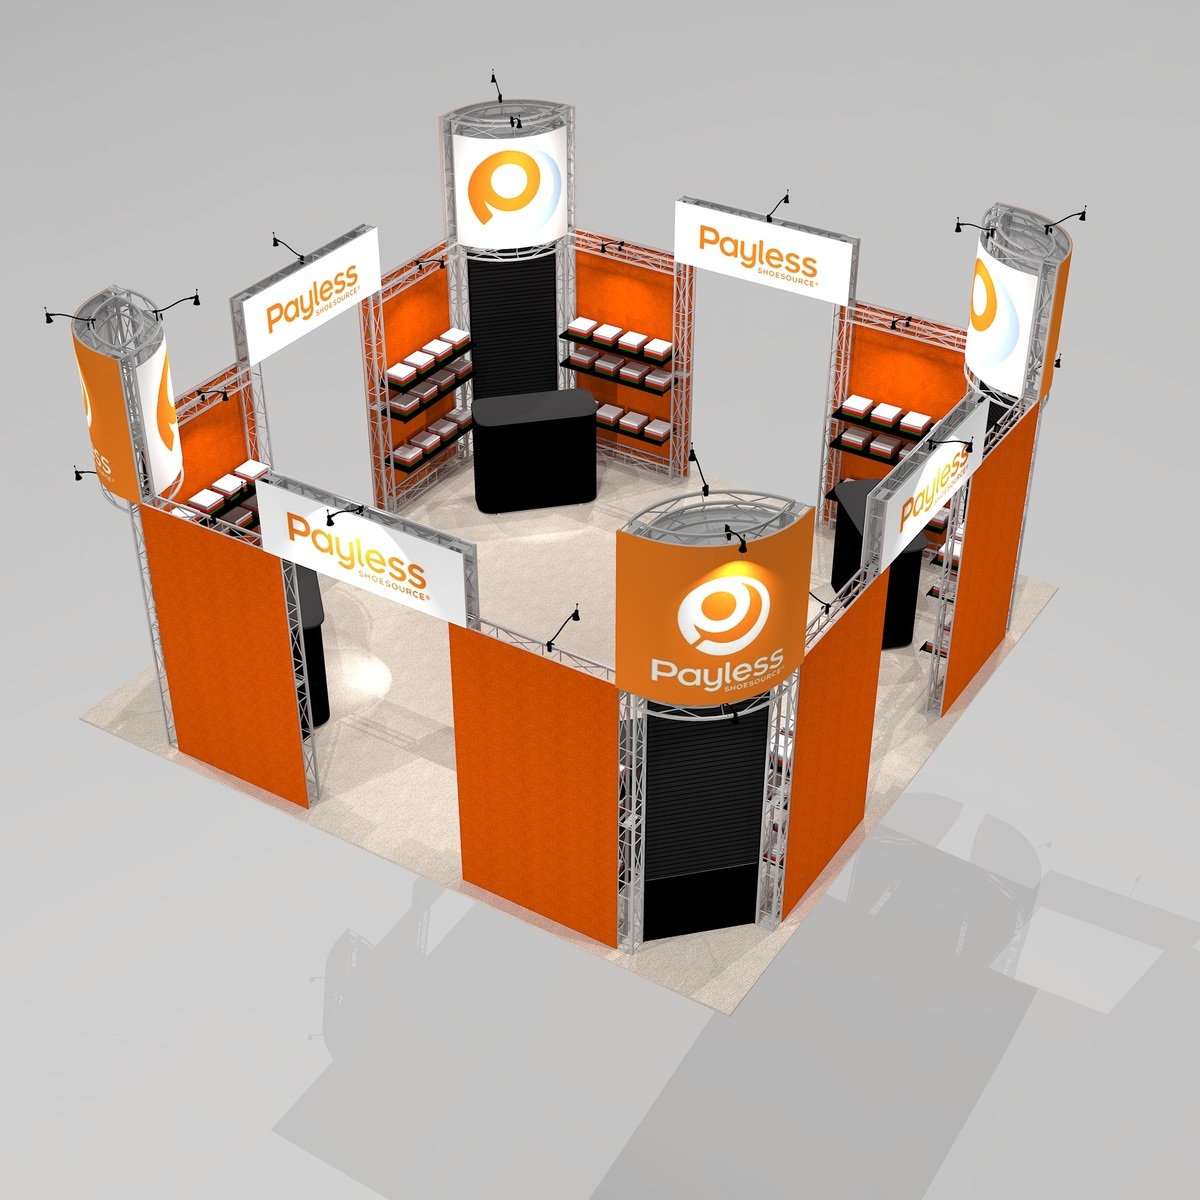 Product Shelving trade show exhibit design EUR2020 Graphic Package A